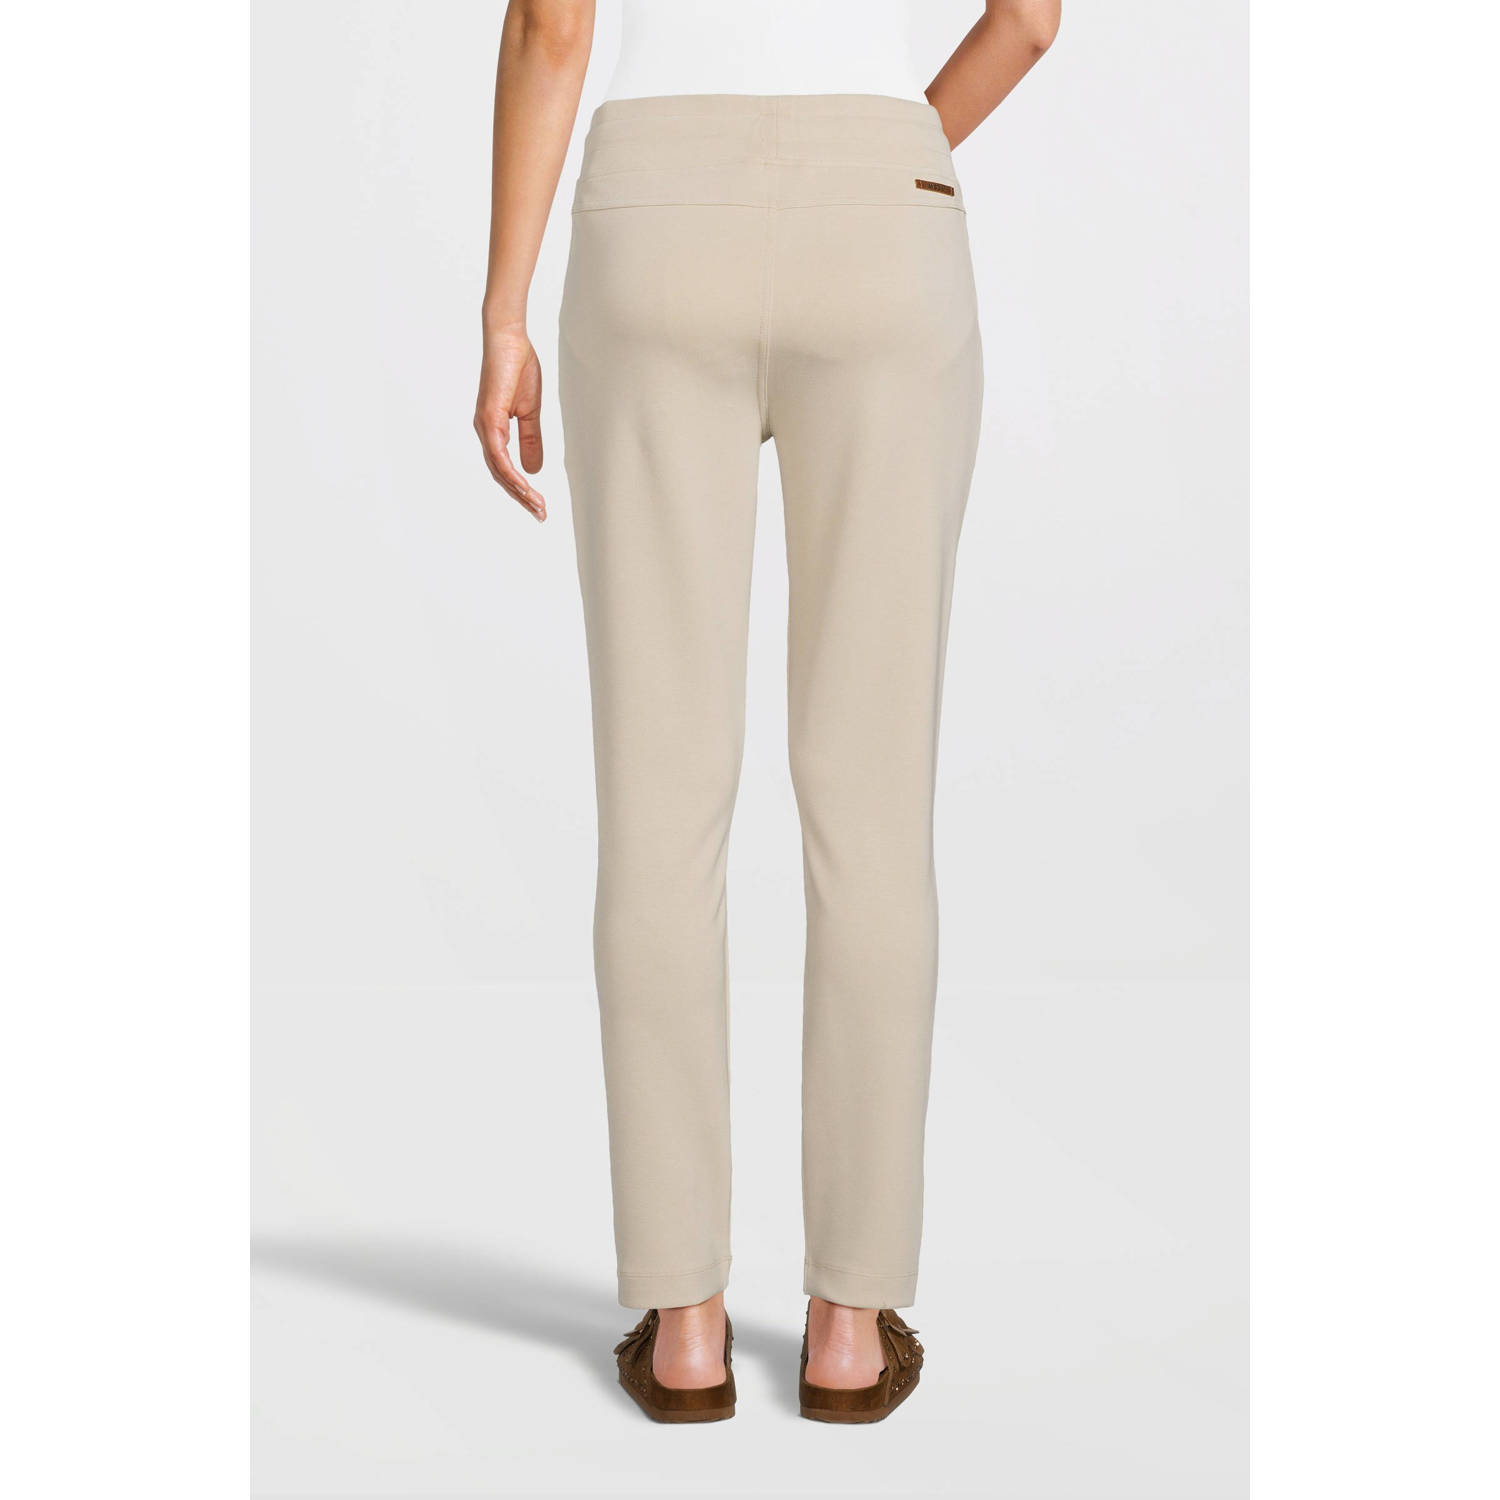 Moscow relaxed broek beige